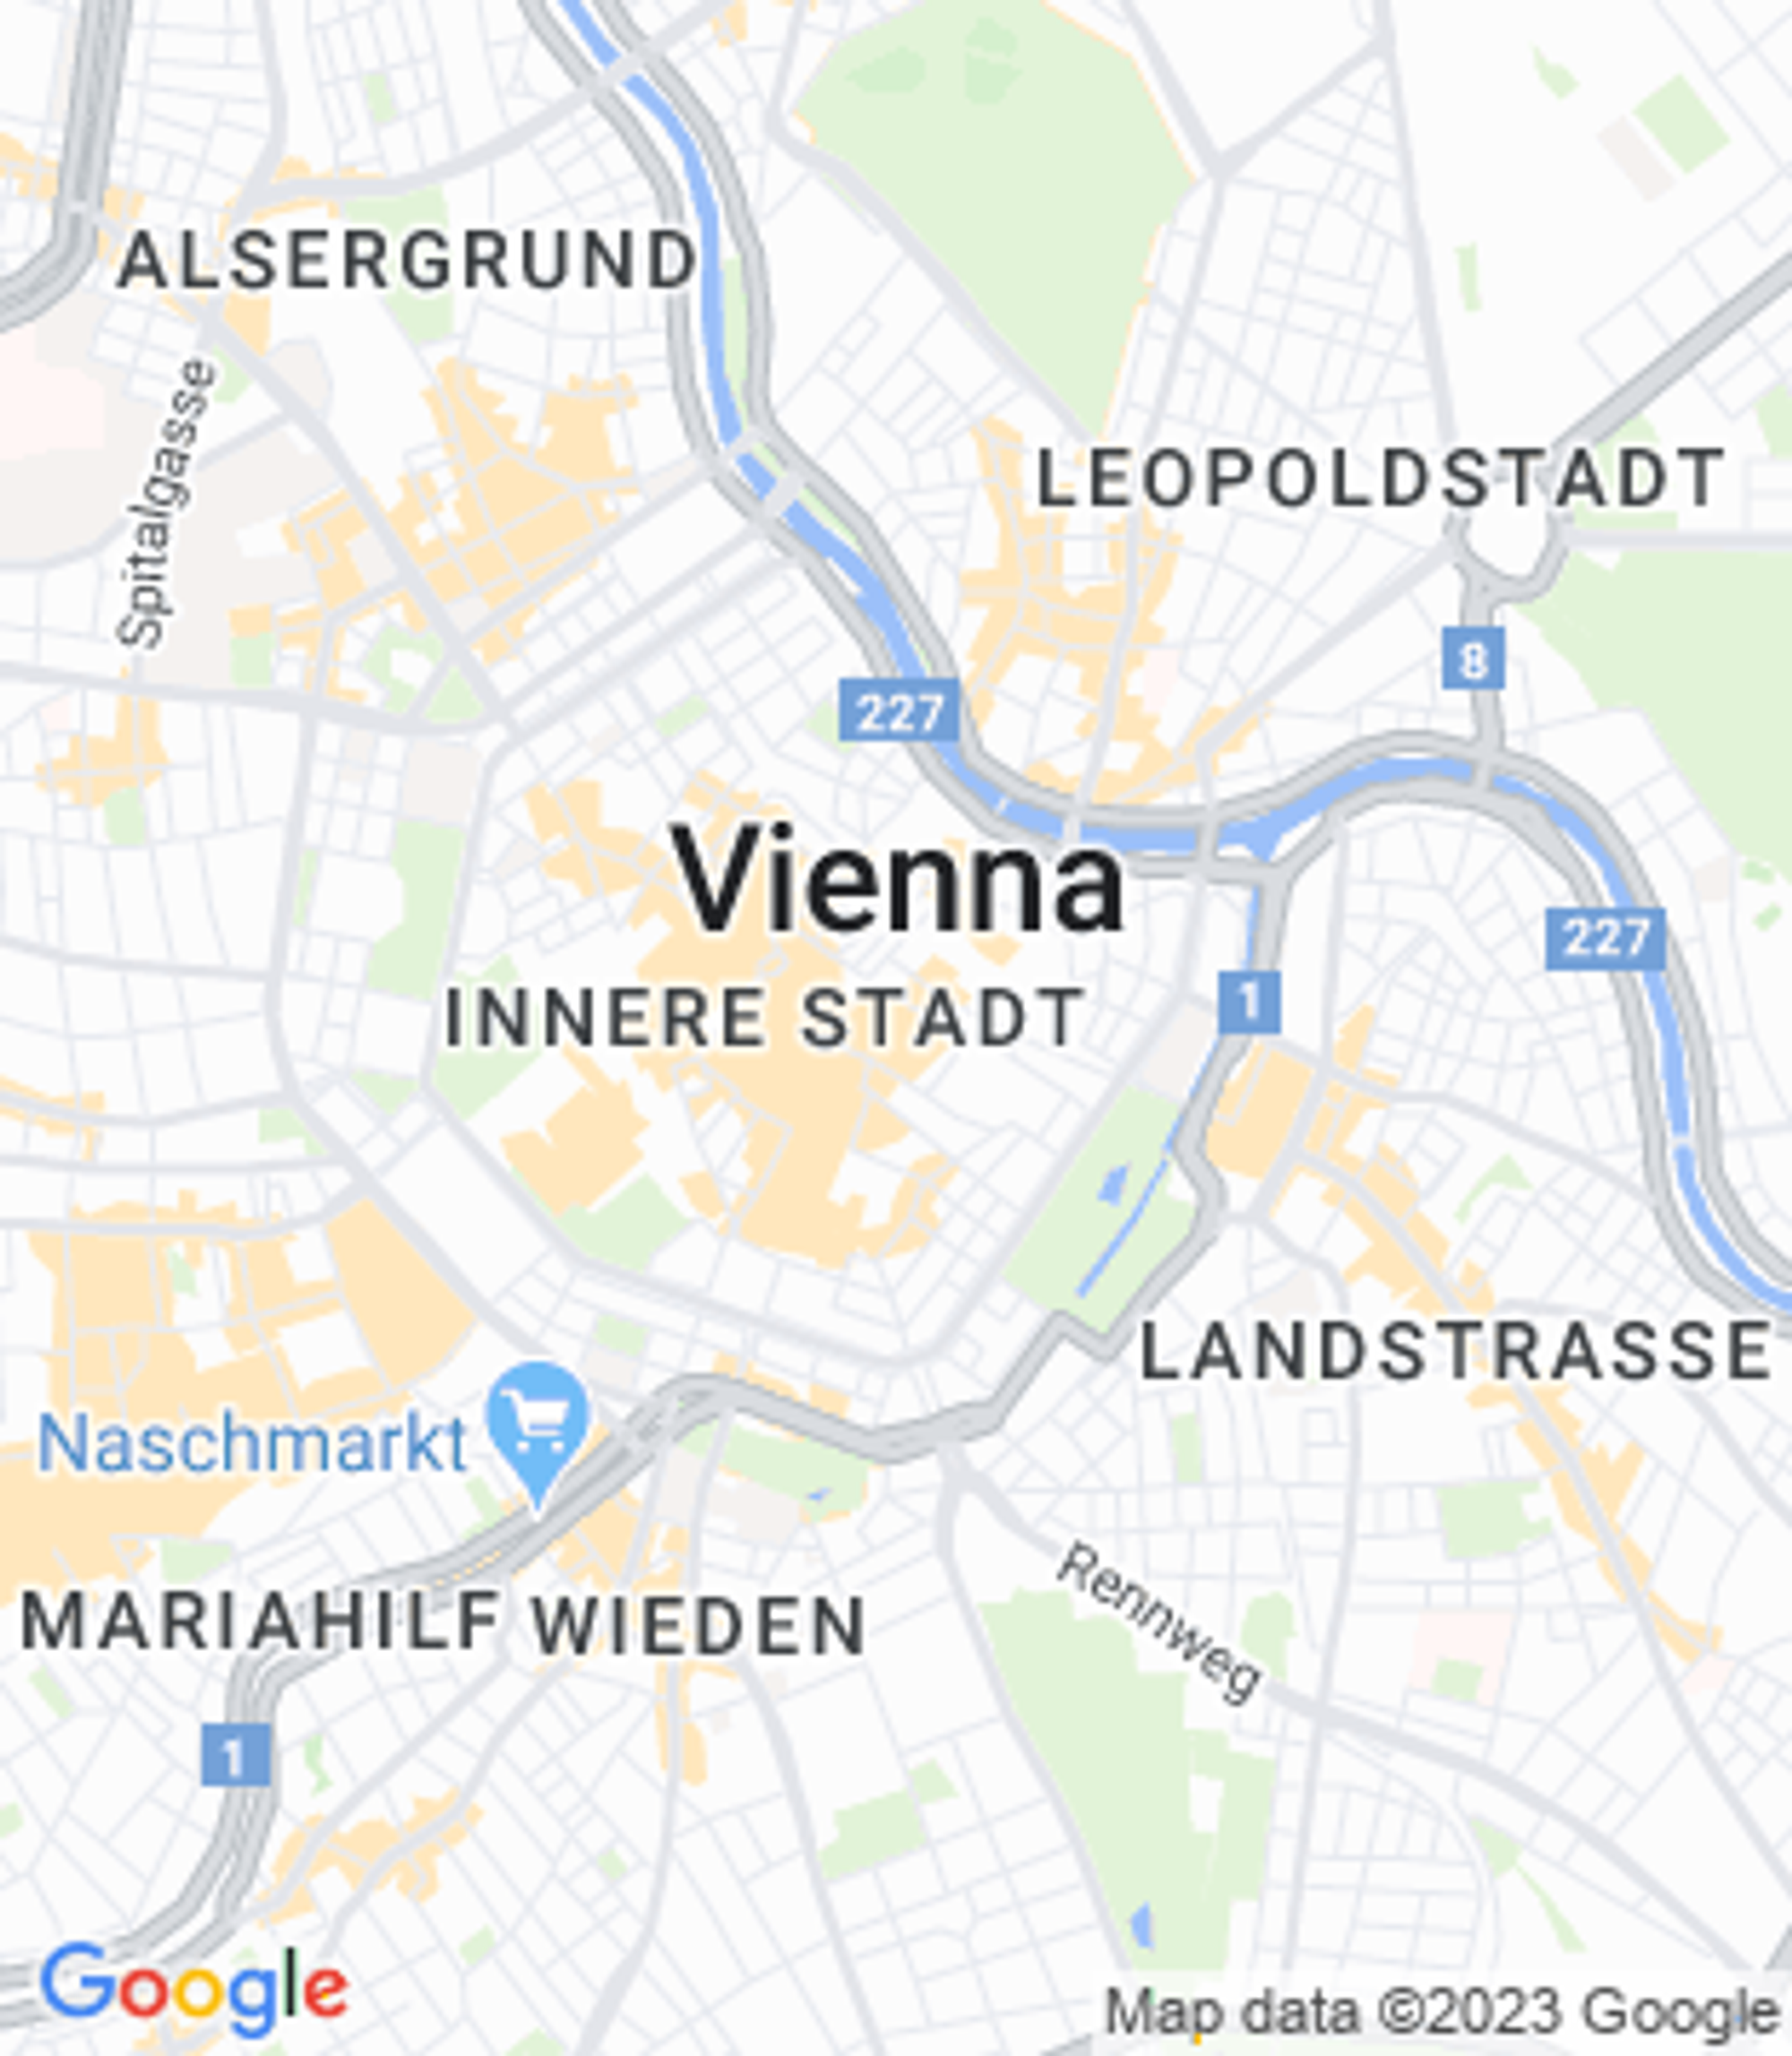 Static map centered on Vienna, Austria:
?size=312x358
&map_id=cf19af61093c176a
&center=48.2082,16.3738
&zoom=13